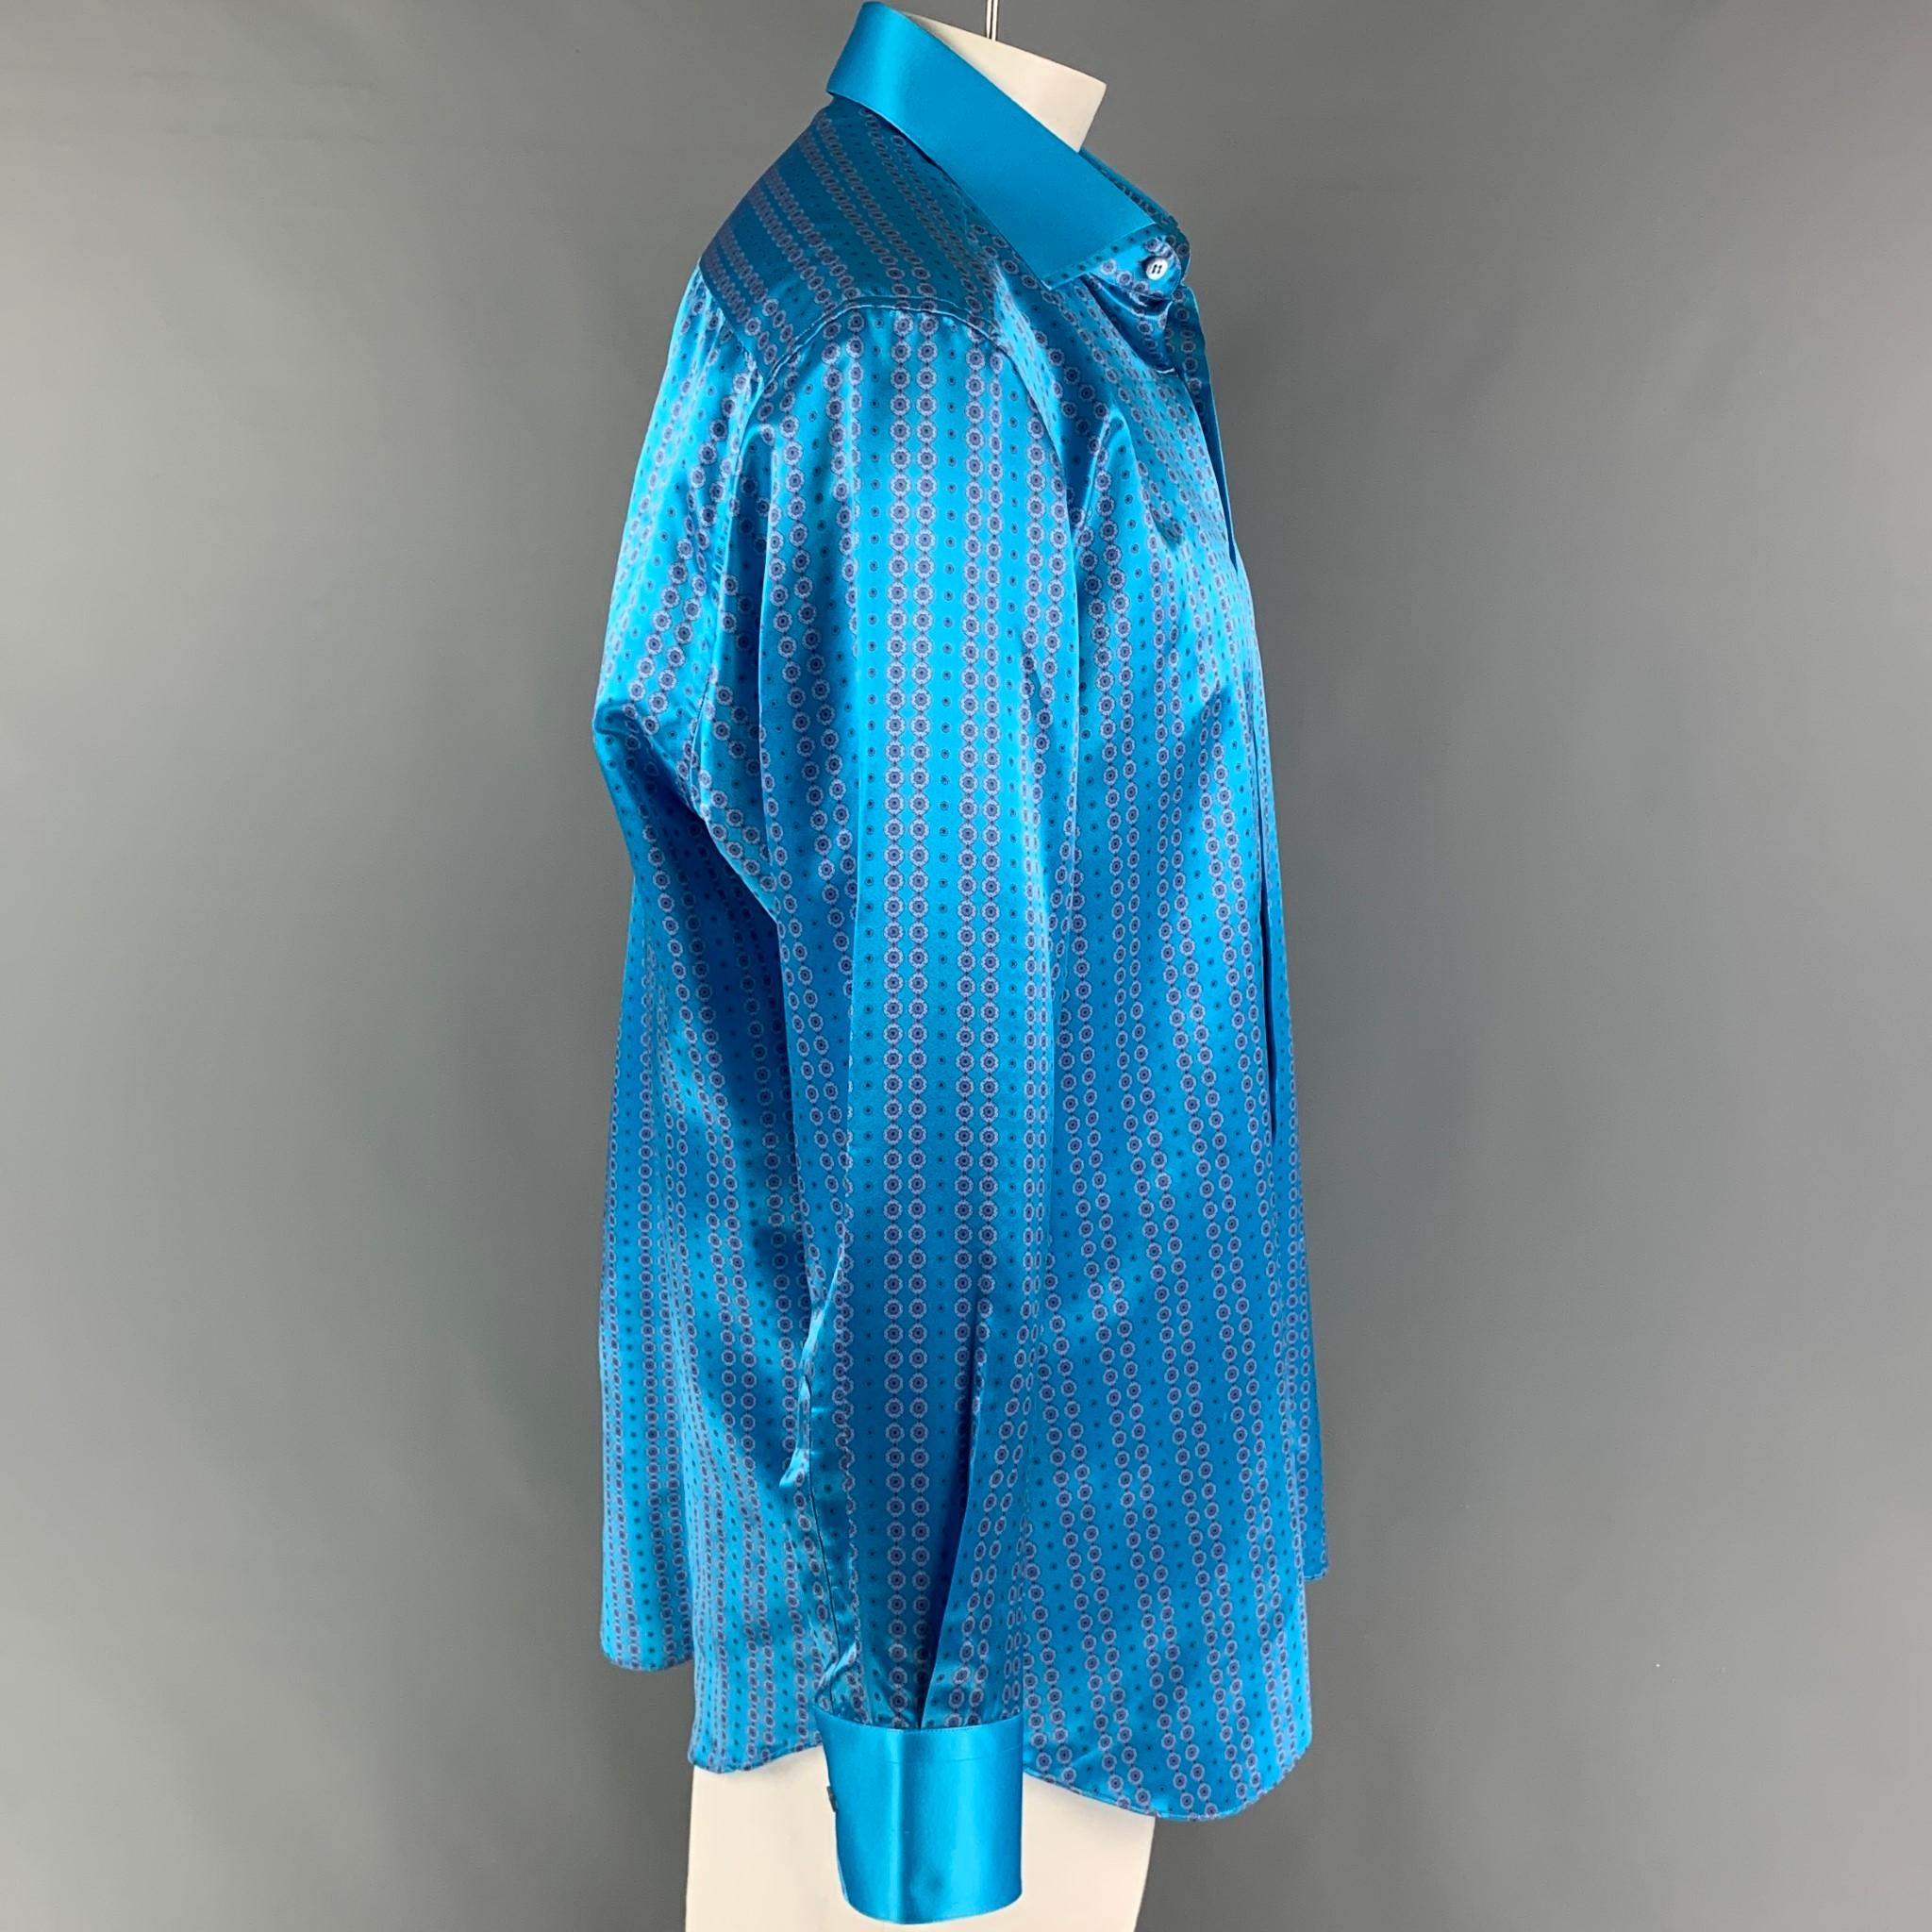 STEFANO RICCI long sleeve shirt comes in a turquoise & light grey dot print silk featuring a spread collar and a button up closure. Made in Italy. 

Excellent Pre-Owned Condition.
Marked: XL
Original Retail Price: $1,400.00

Measurements:

Shoulder: